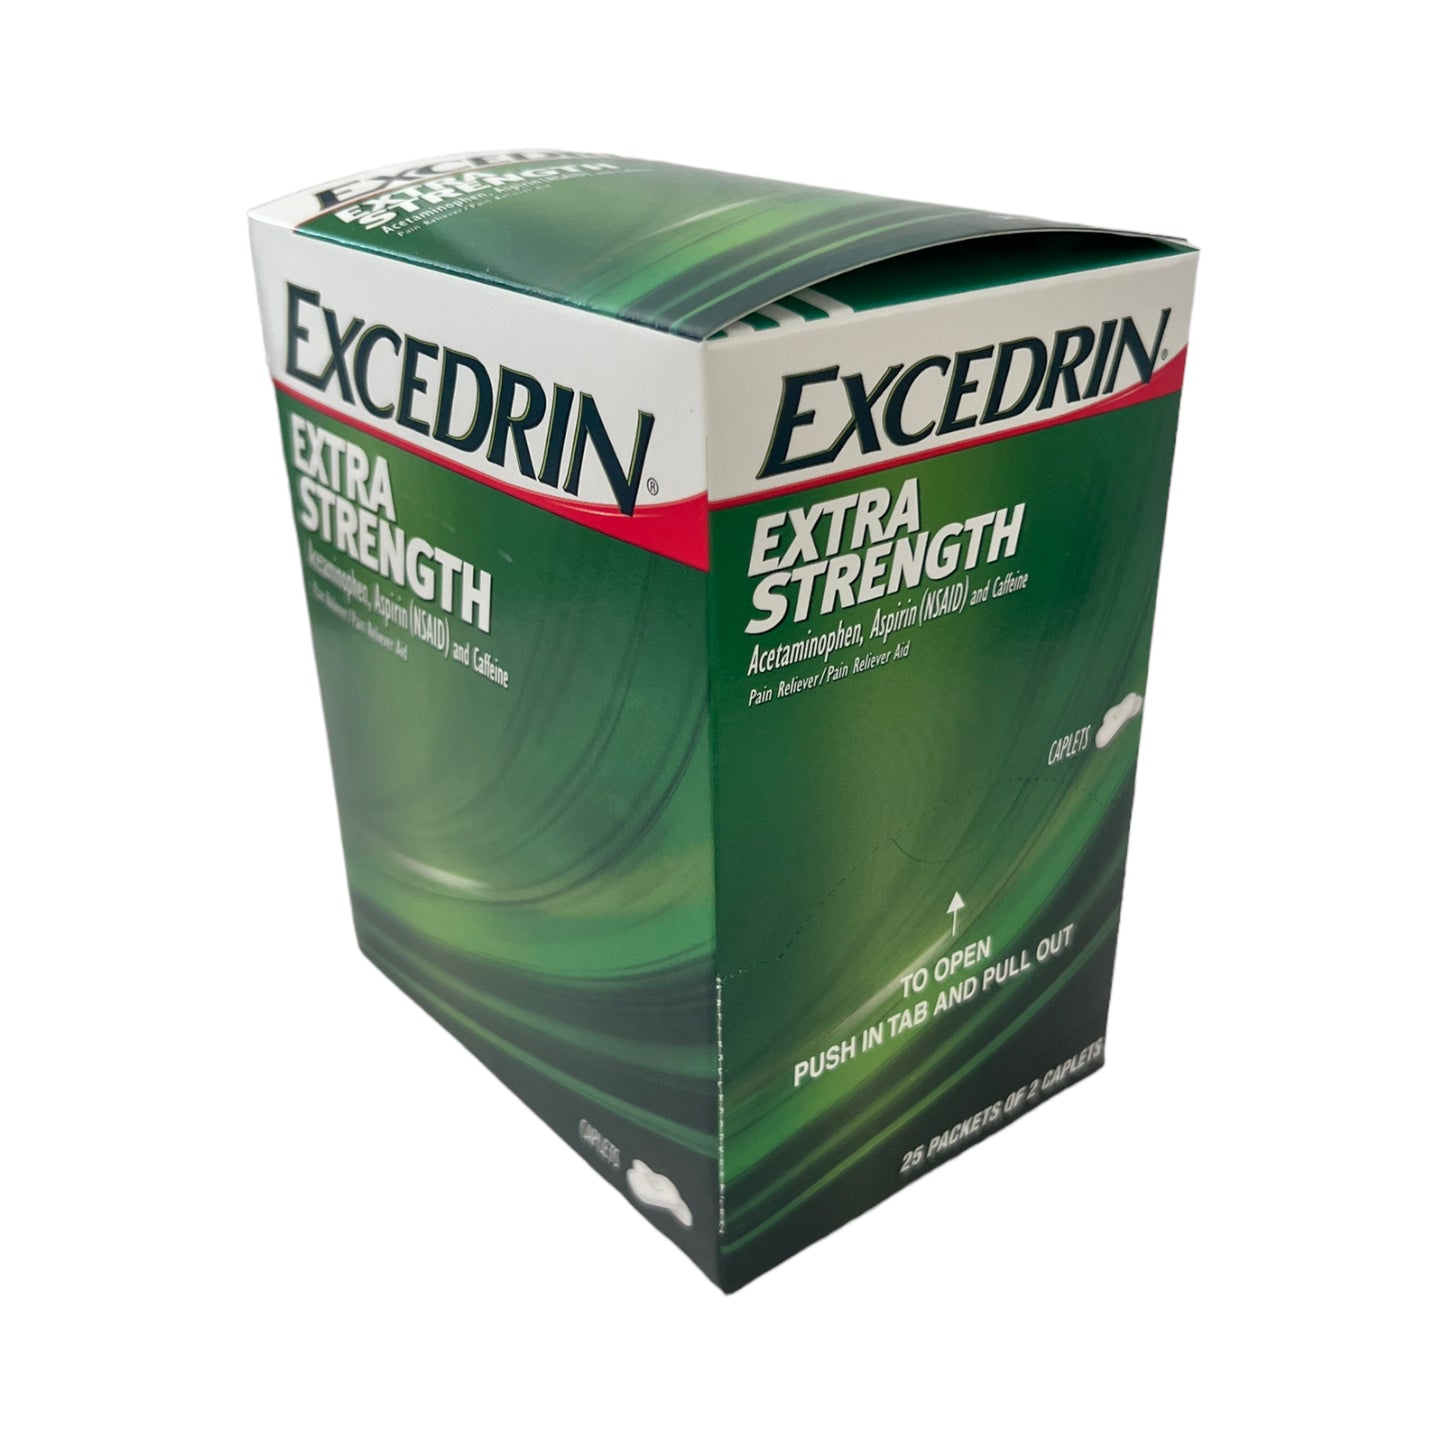 Excedrin Extra Strength 25 Packs 2ct